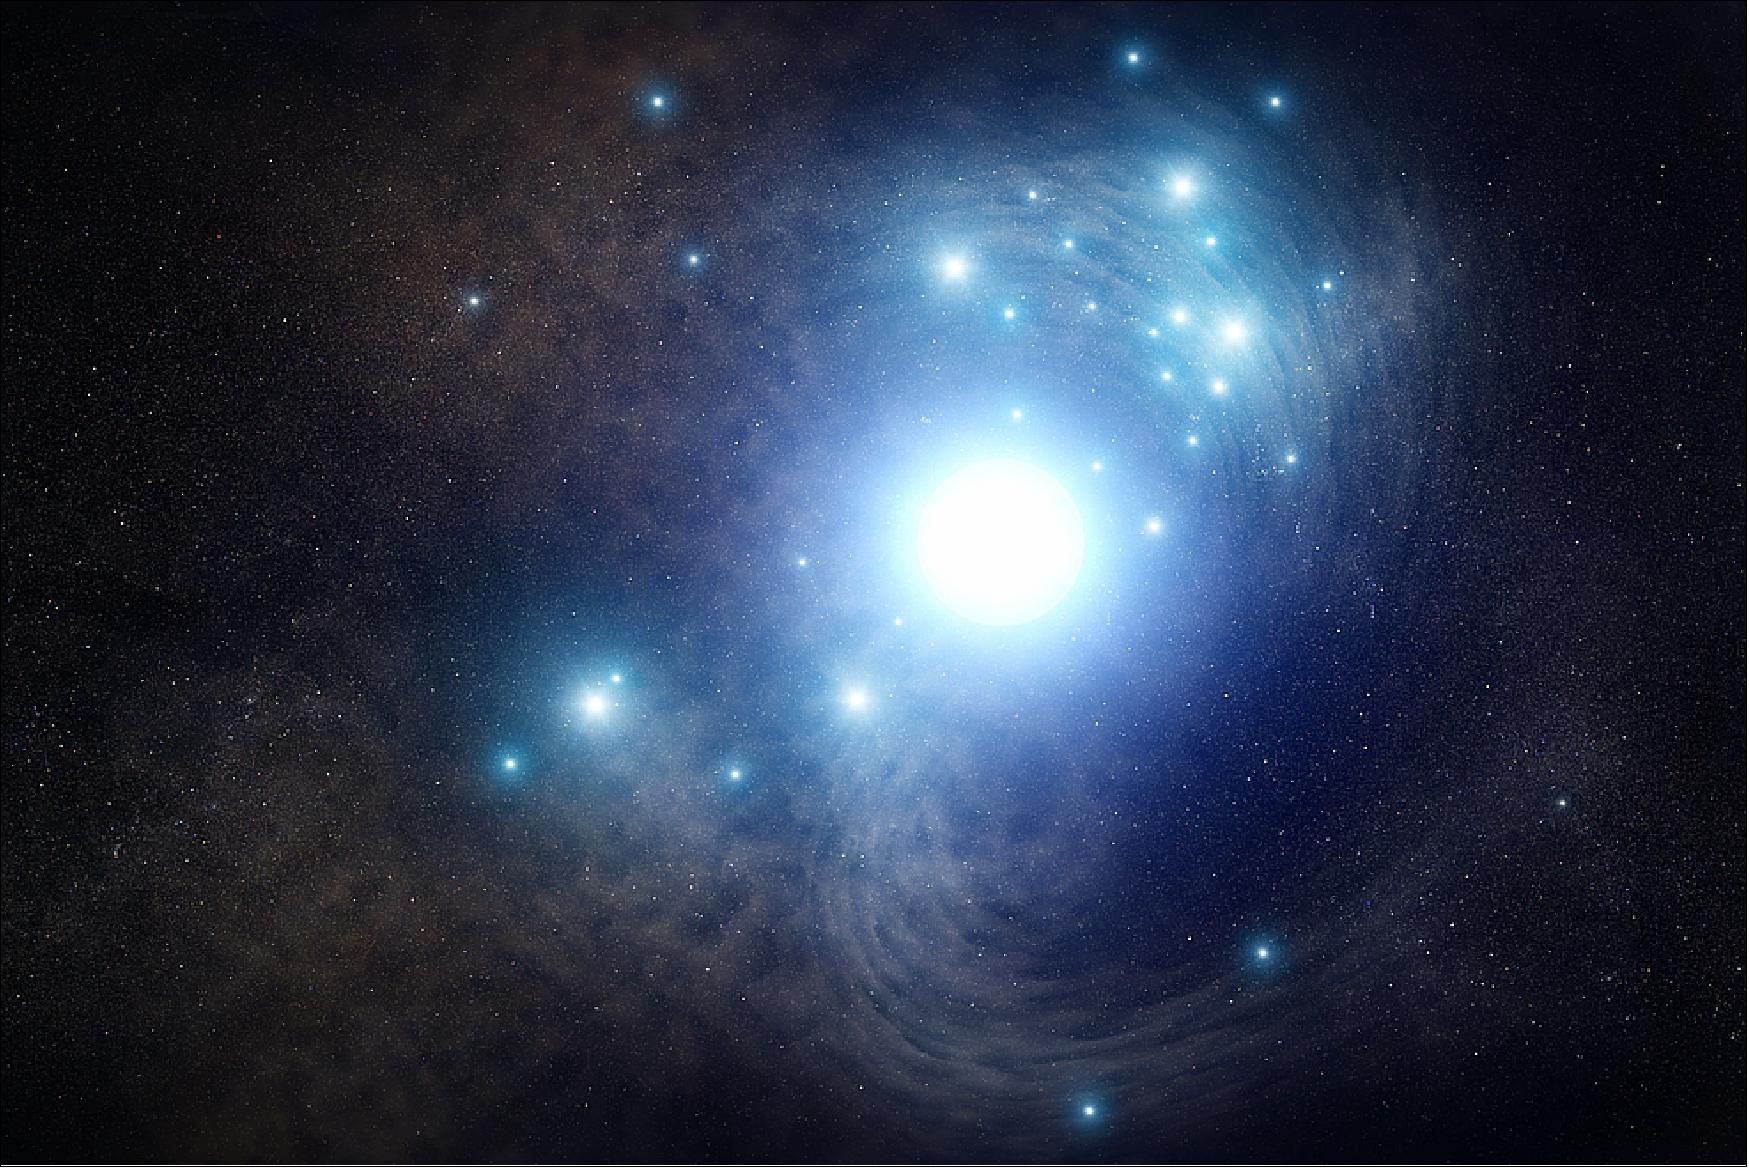 Figure 7: This is an artist's concept of a blue supergiant star that once existed inside a cluster of young stars in the spiral galaxy NGC 3938, located 65 million light-years away. It exploded as a supernova in 2017, and Hubble Space Telescope archival photos were used to locate the doomed progenitor star, as it looked in 2007. The star may have been as massive as 50 suns and burned at a furious rate, making it hotter and bluer than our Sun. It was so hot, it had lost its outer layers of hydrogen and helium. When it exploded in 2017, astronomers categorized it as a Type Ic supernova because of the lack of hydrogen and helium in the supernova's spectrum. In an alternative scenario (not shown here) a binary companion to the massive star may have stripped off its hydrogen and helium layers [image credits: NASA, ESA, and J. Olmsted (STScI)]